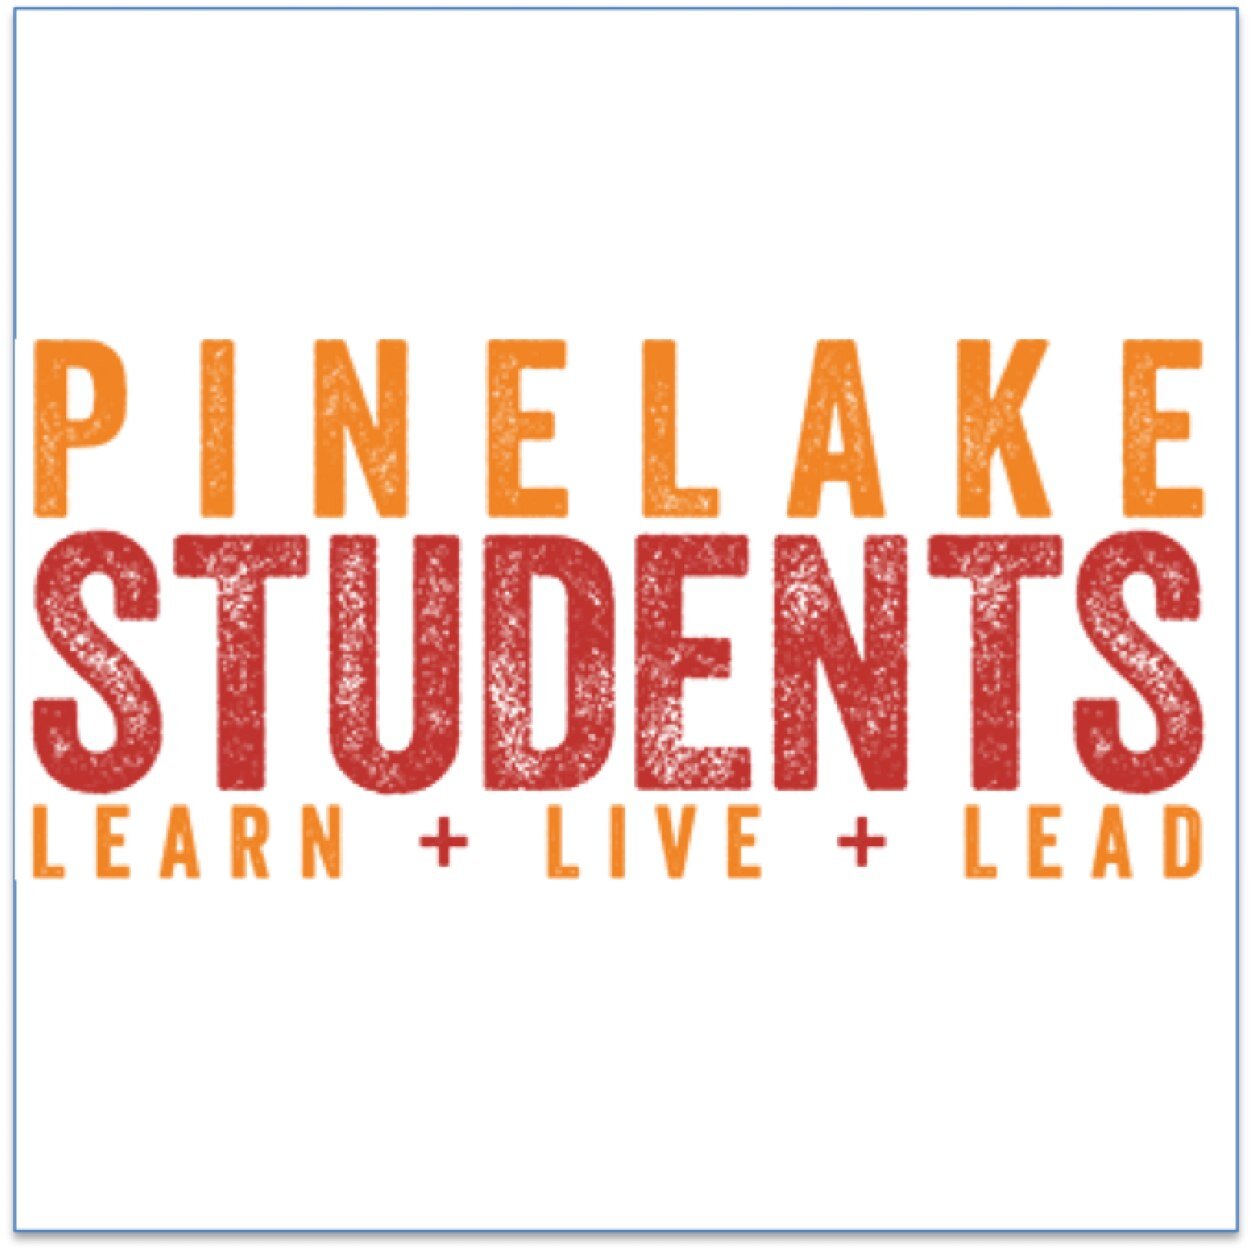 Pinelake Madison Campus Student Ministry. High School service is every Sunday at 5:30pm. Middle School service is every Wednesday at 6:15pm.